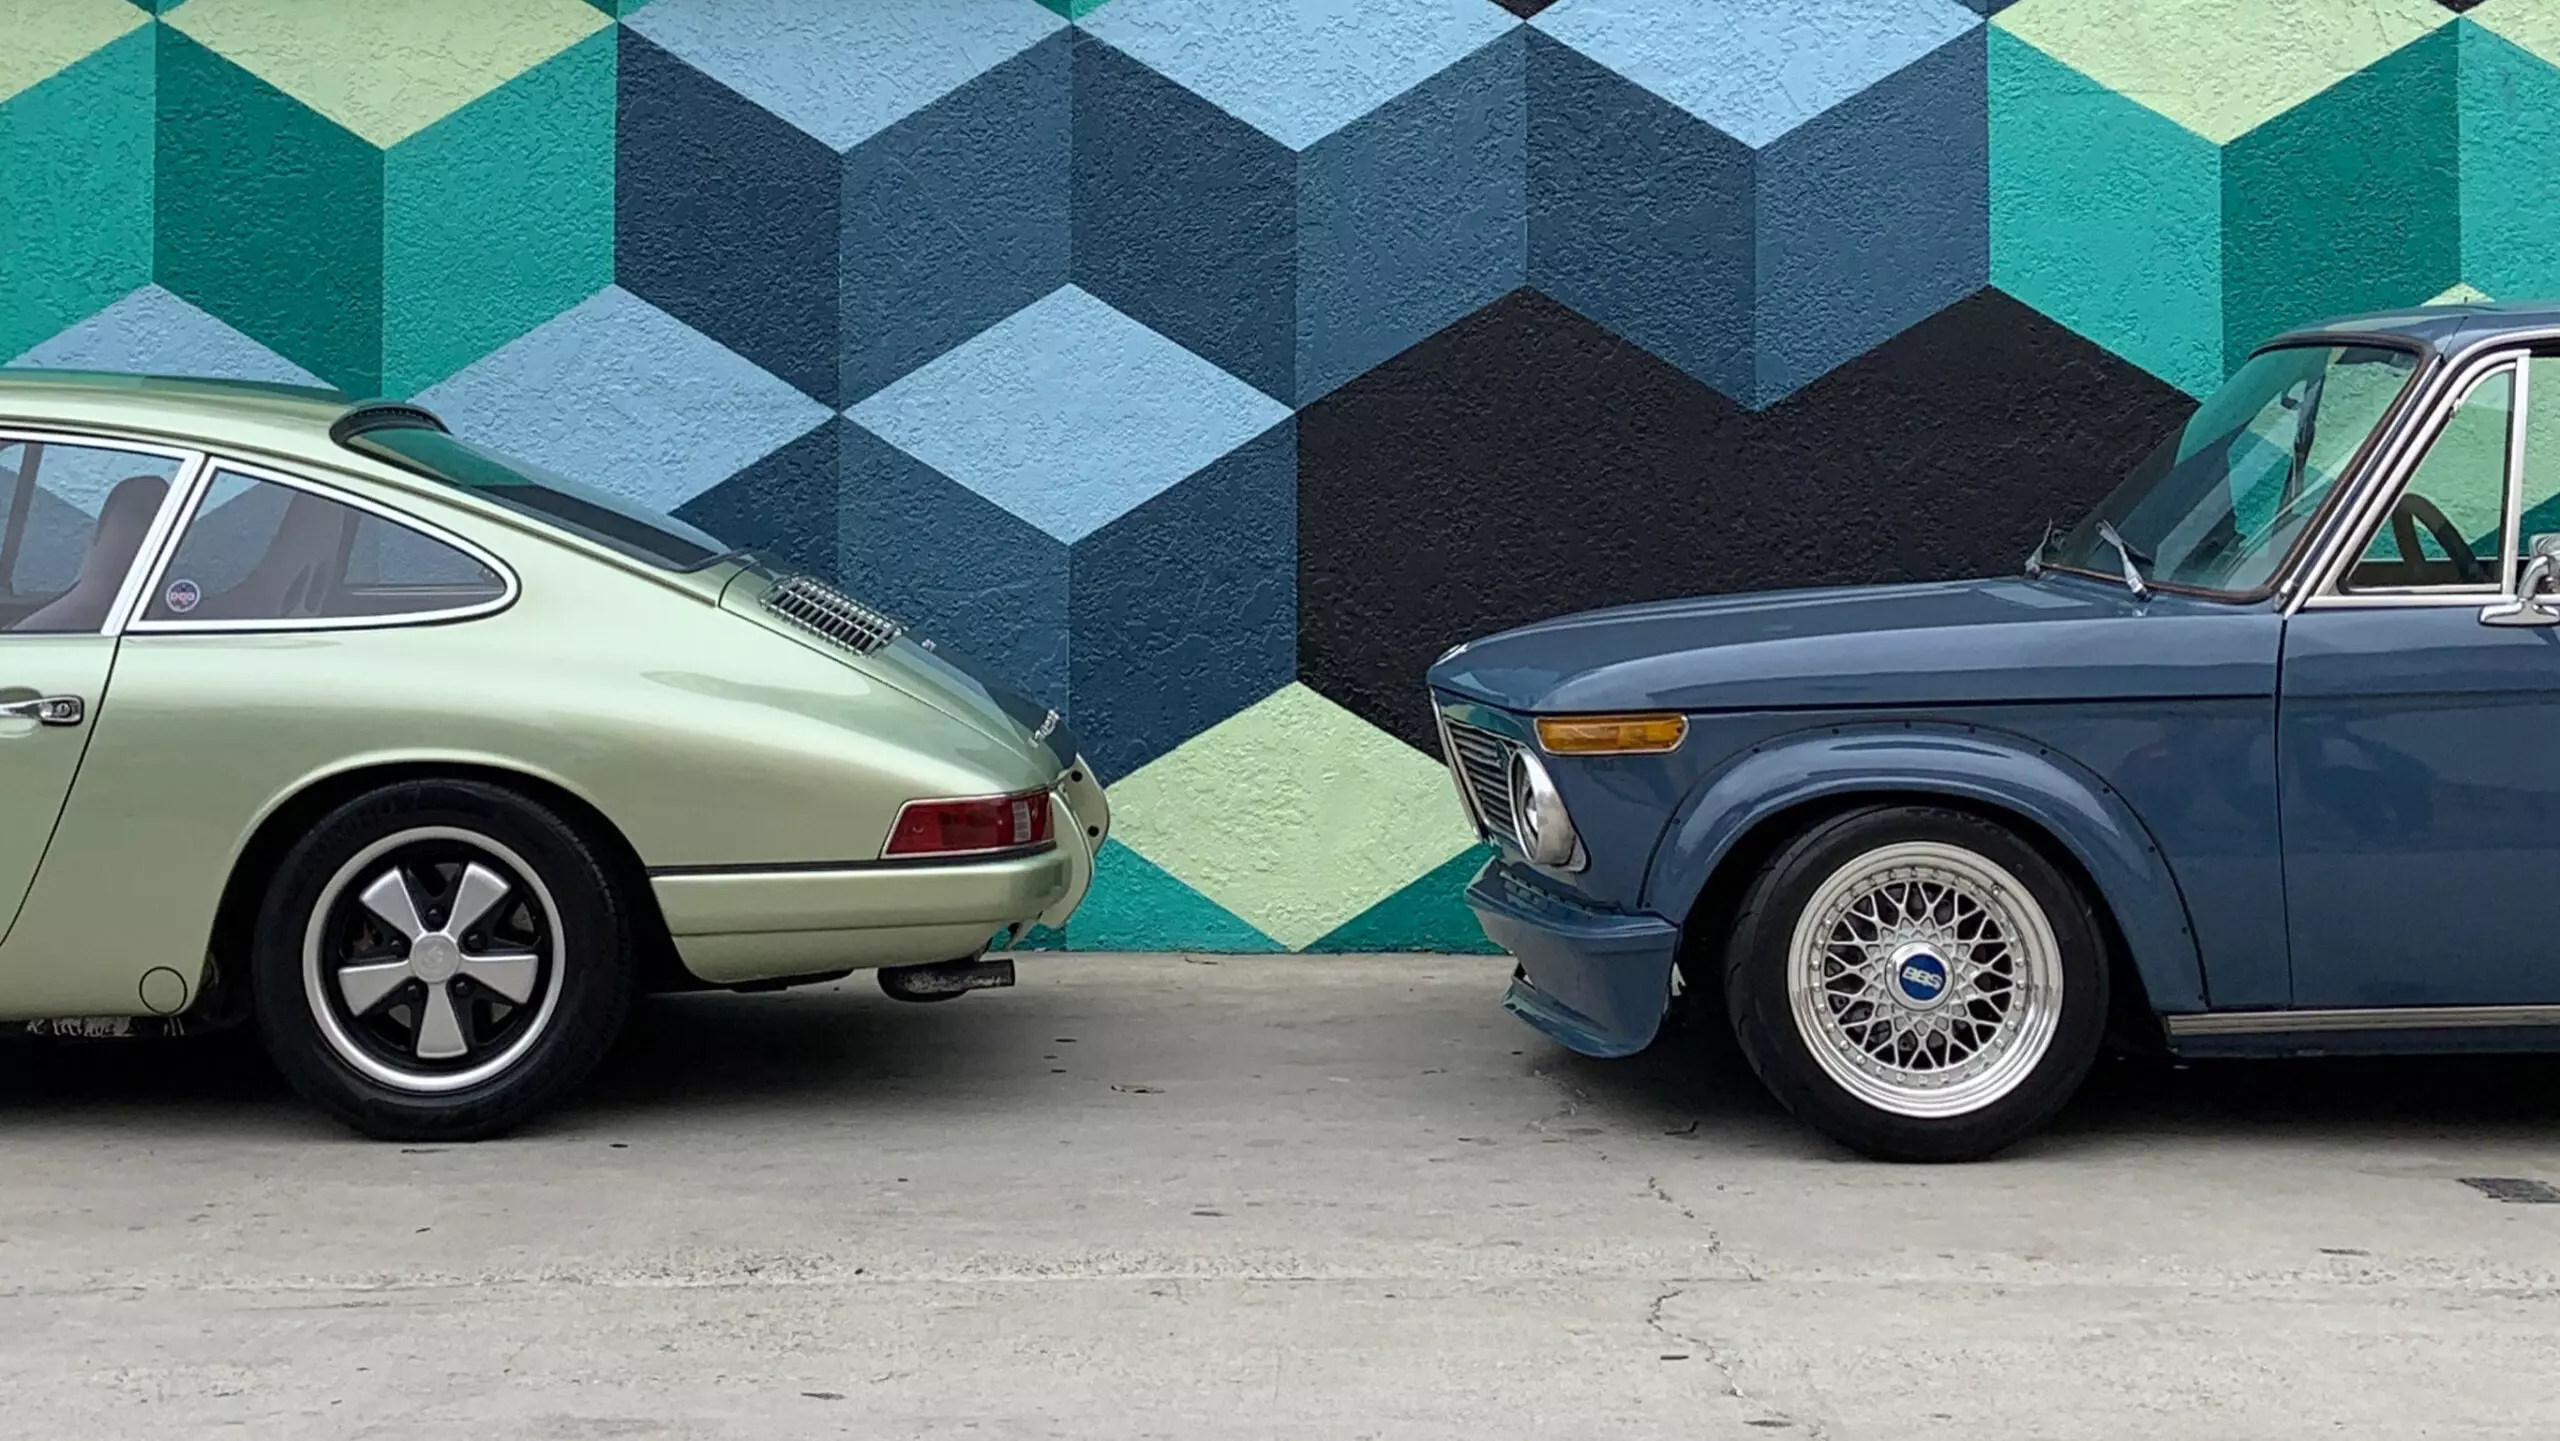 These Cars Match the Wall They’re Parked Next To Bizarrely Well | Autance